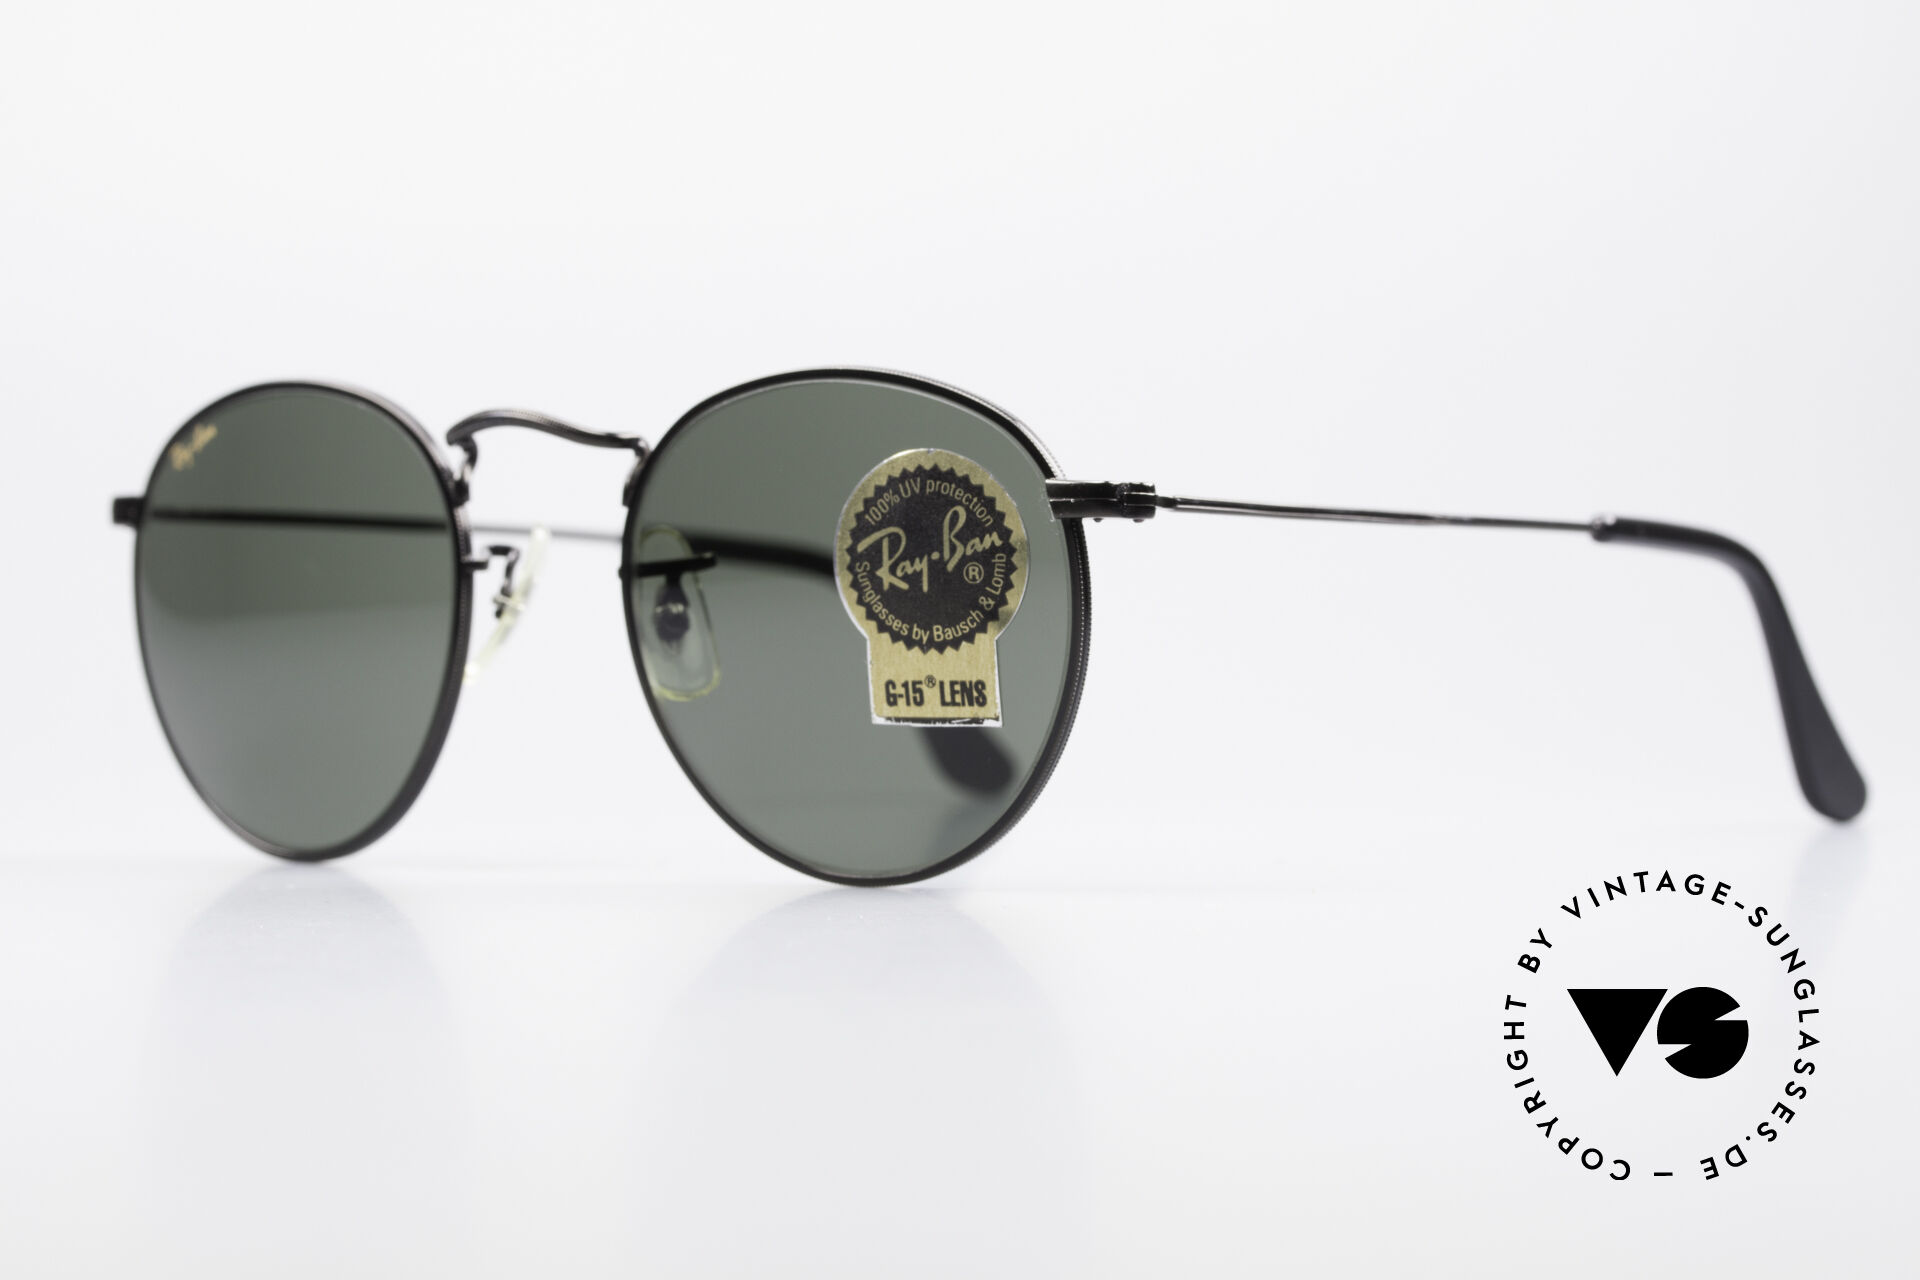 https://www.vintage-sunglasses-shop.com/media/products6/full/14467_17201_Ray-Ban-Round-Metal-47_Small-Round-USA-Sunglasses_Men_Women_Round_Sunglasses.jpg